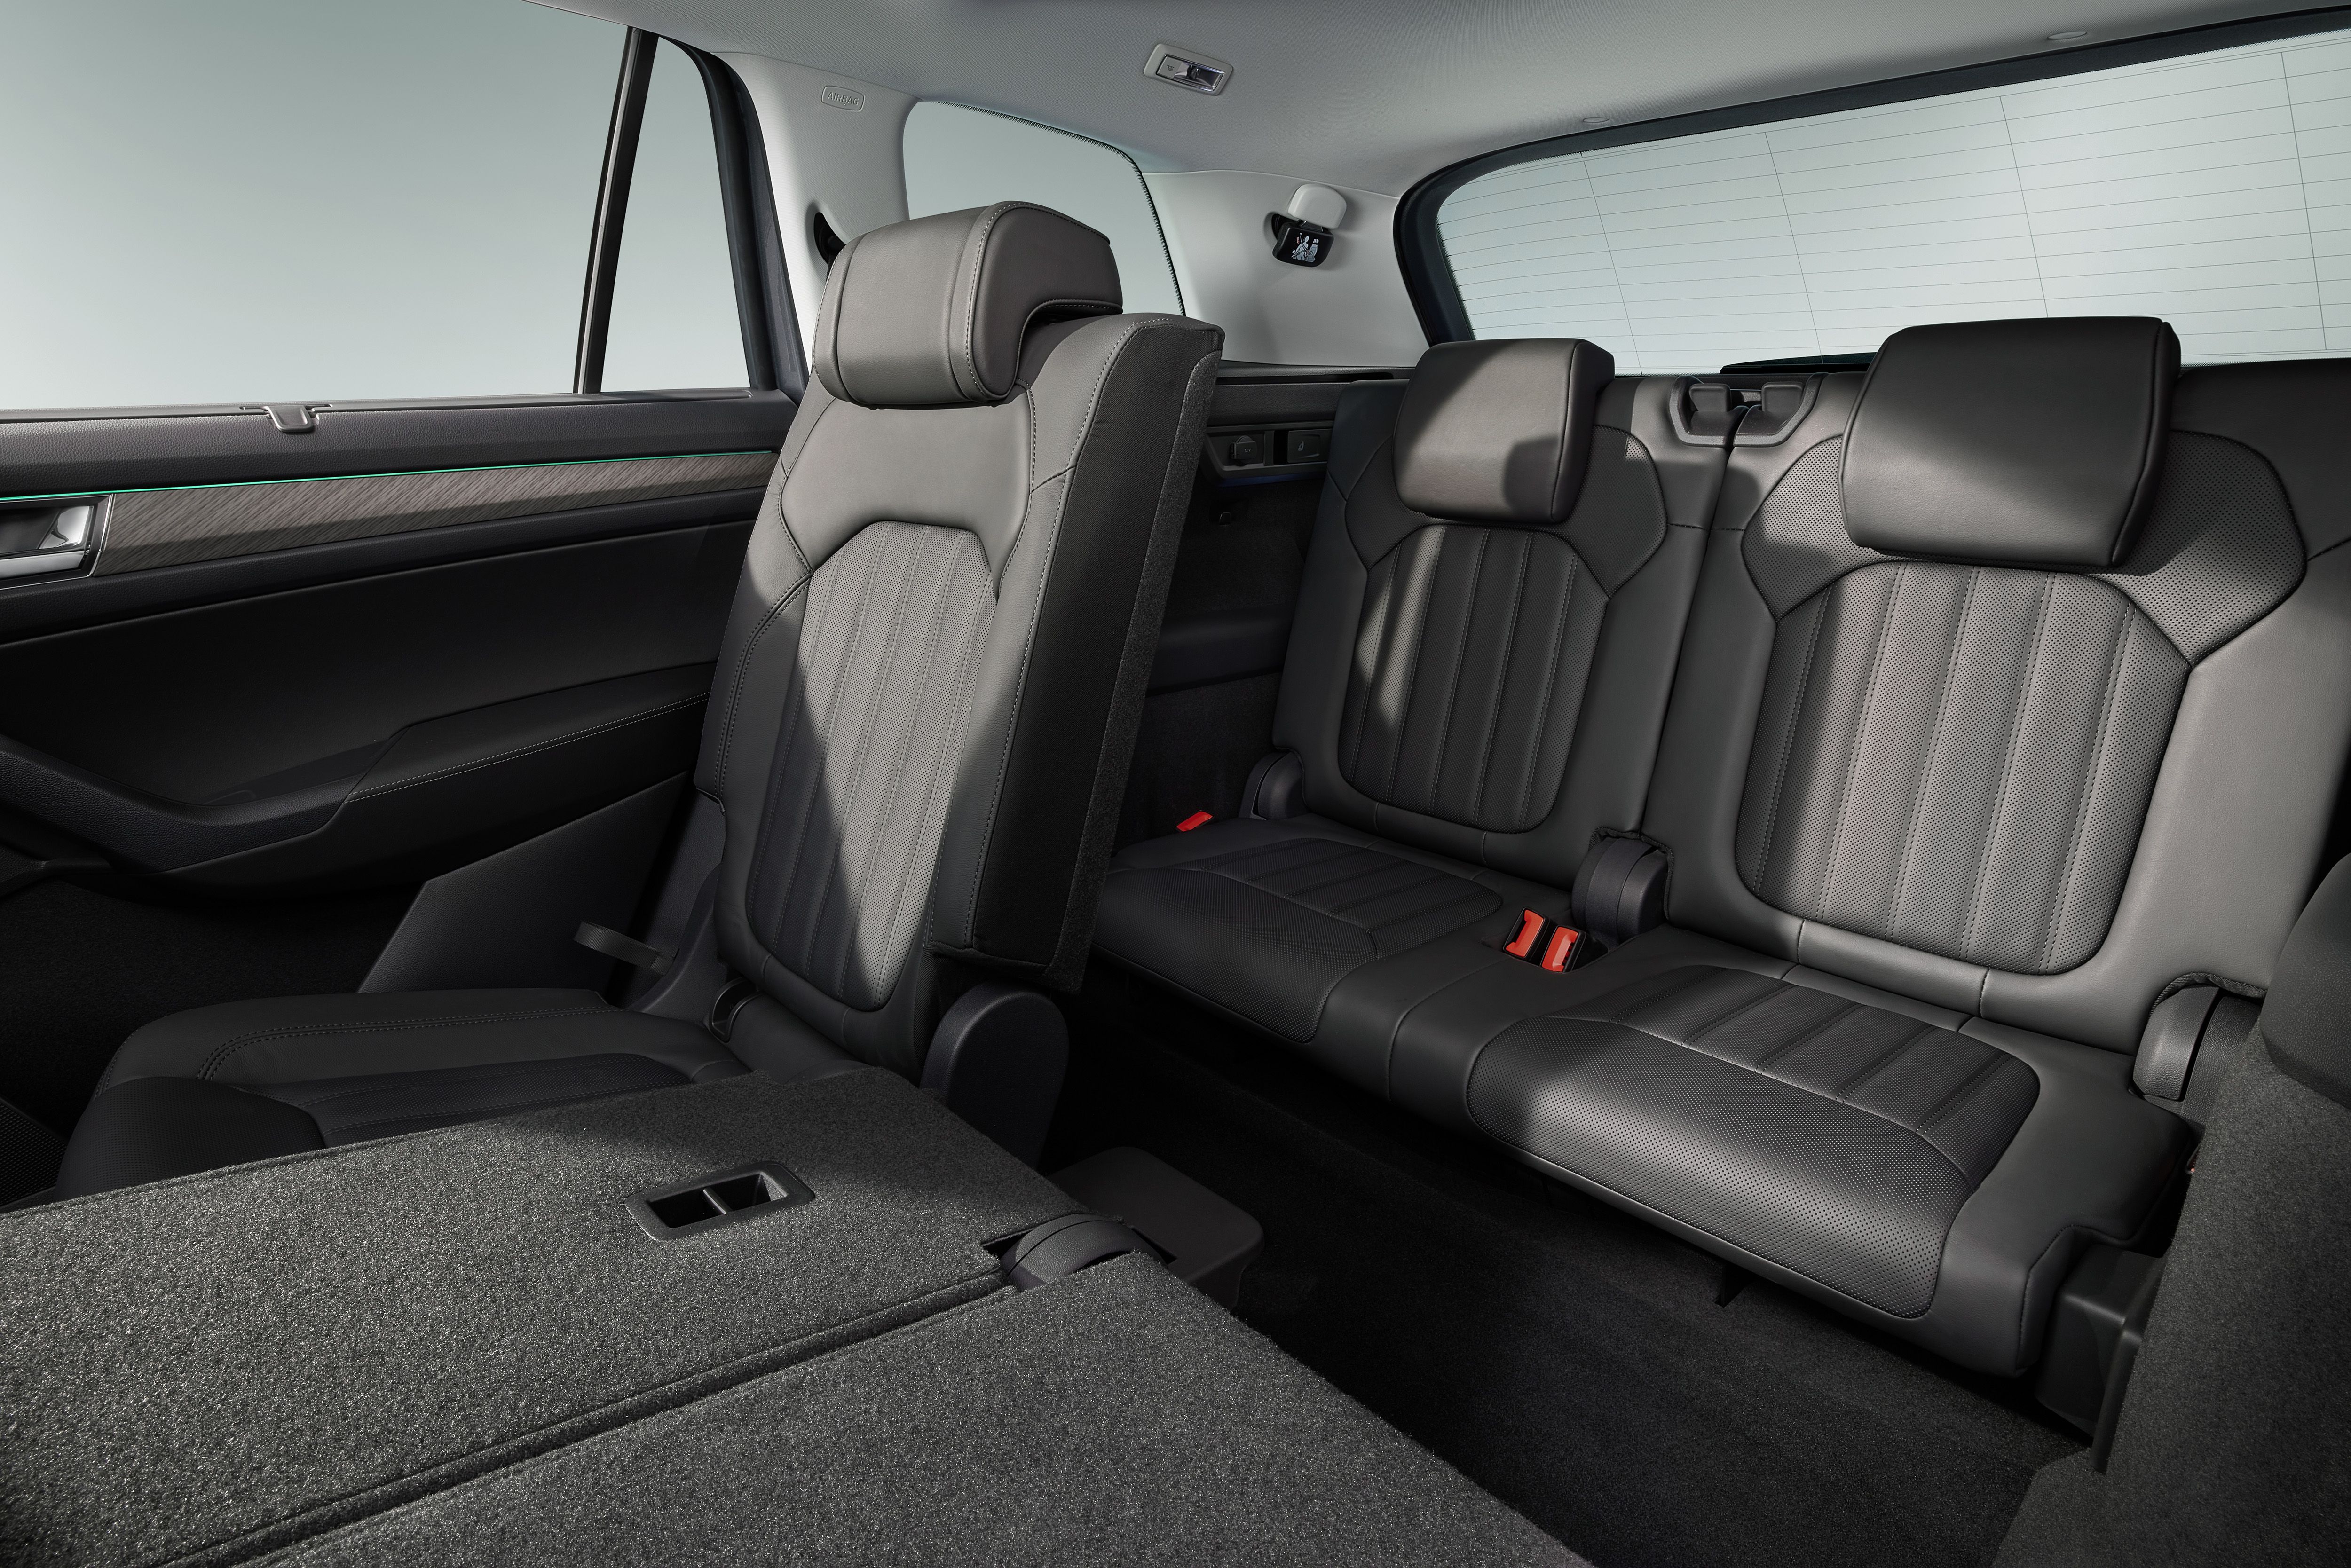 The third row of seats in the Kodiaq